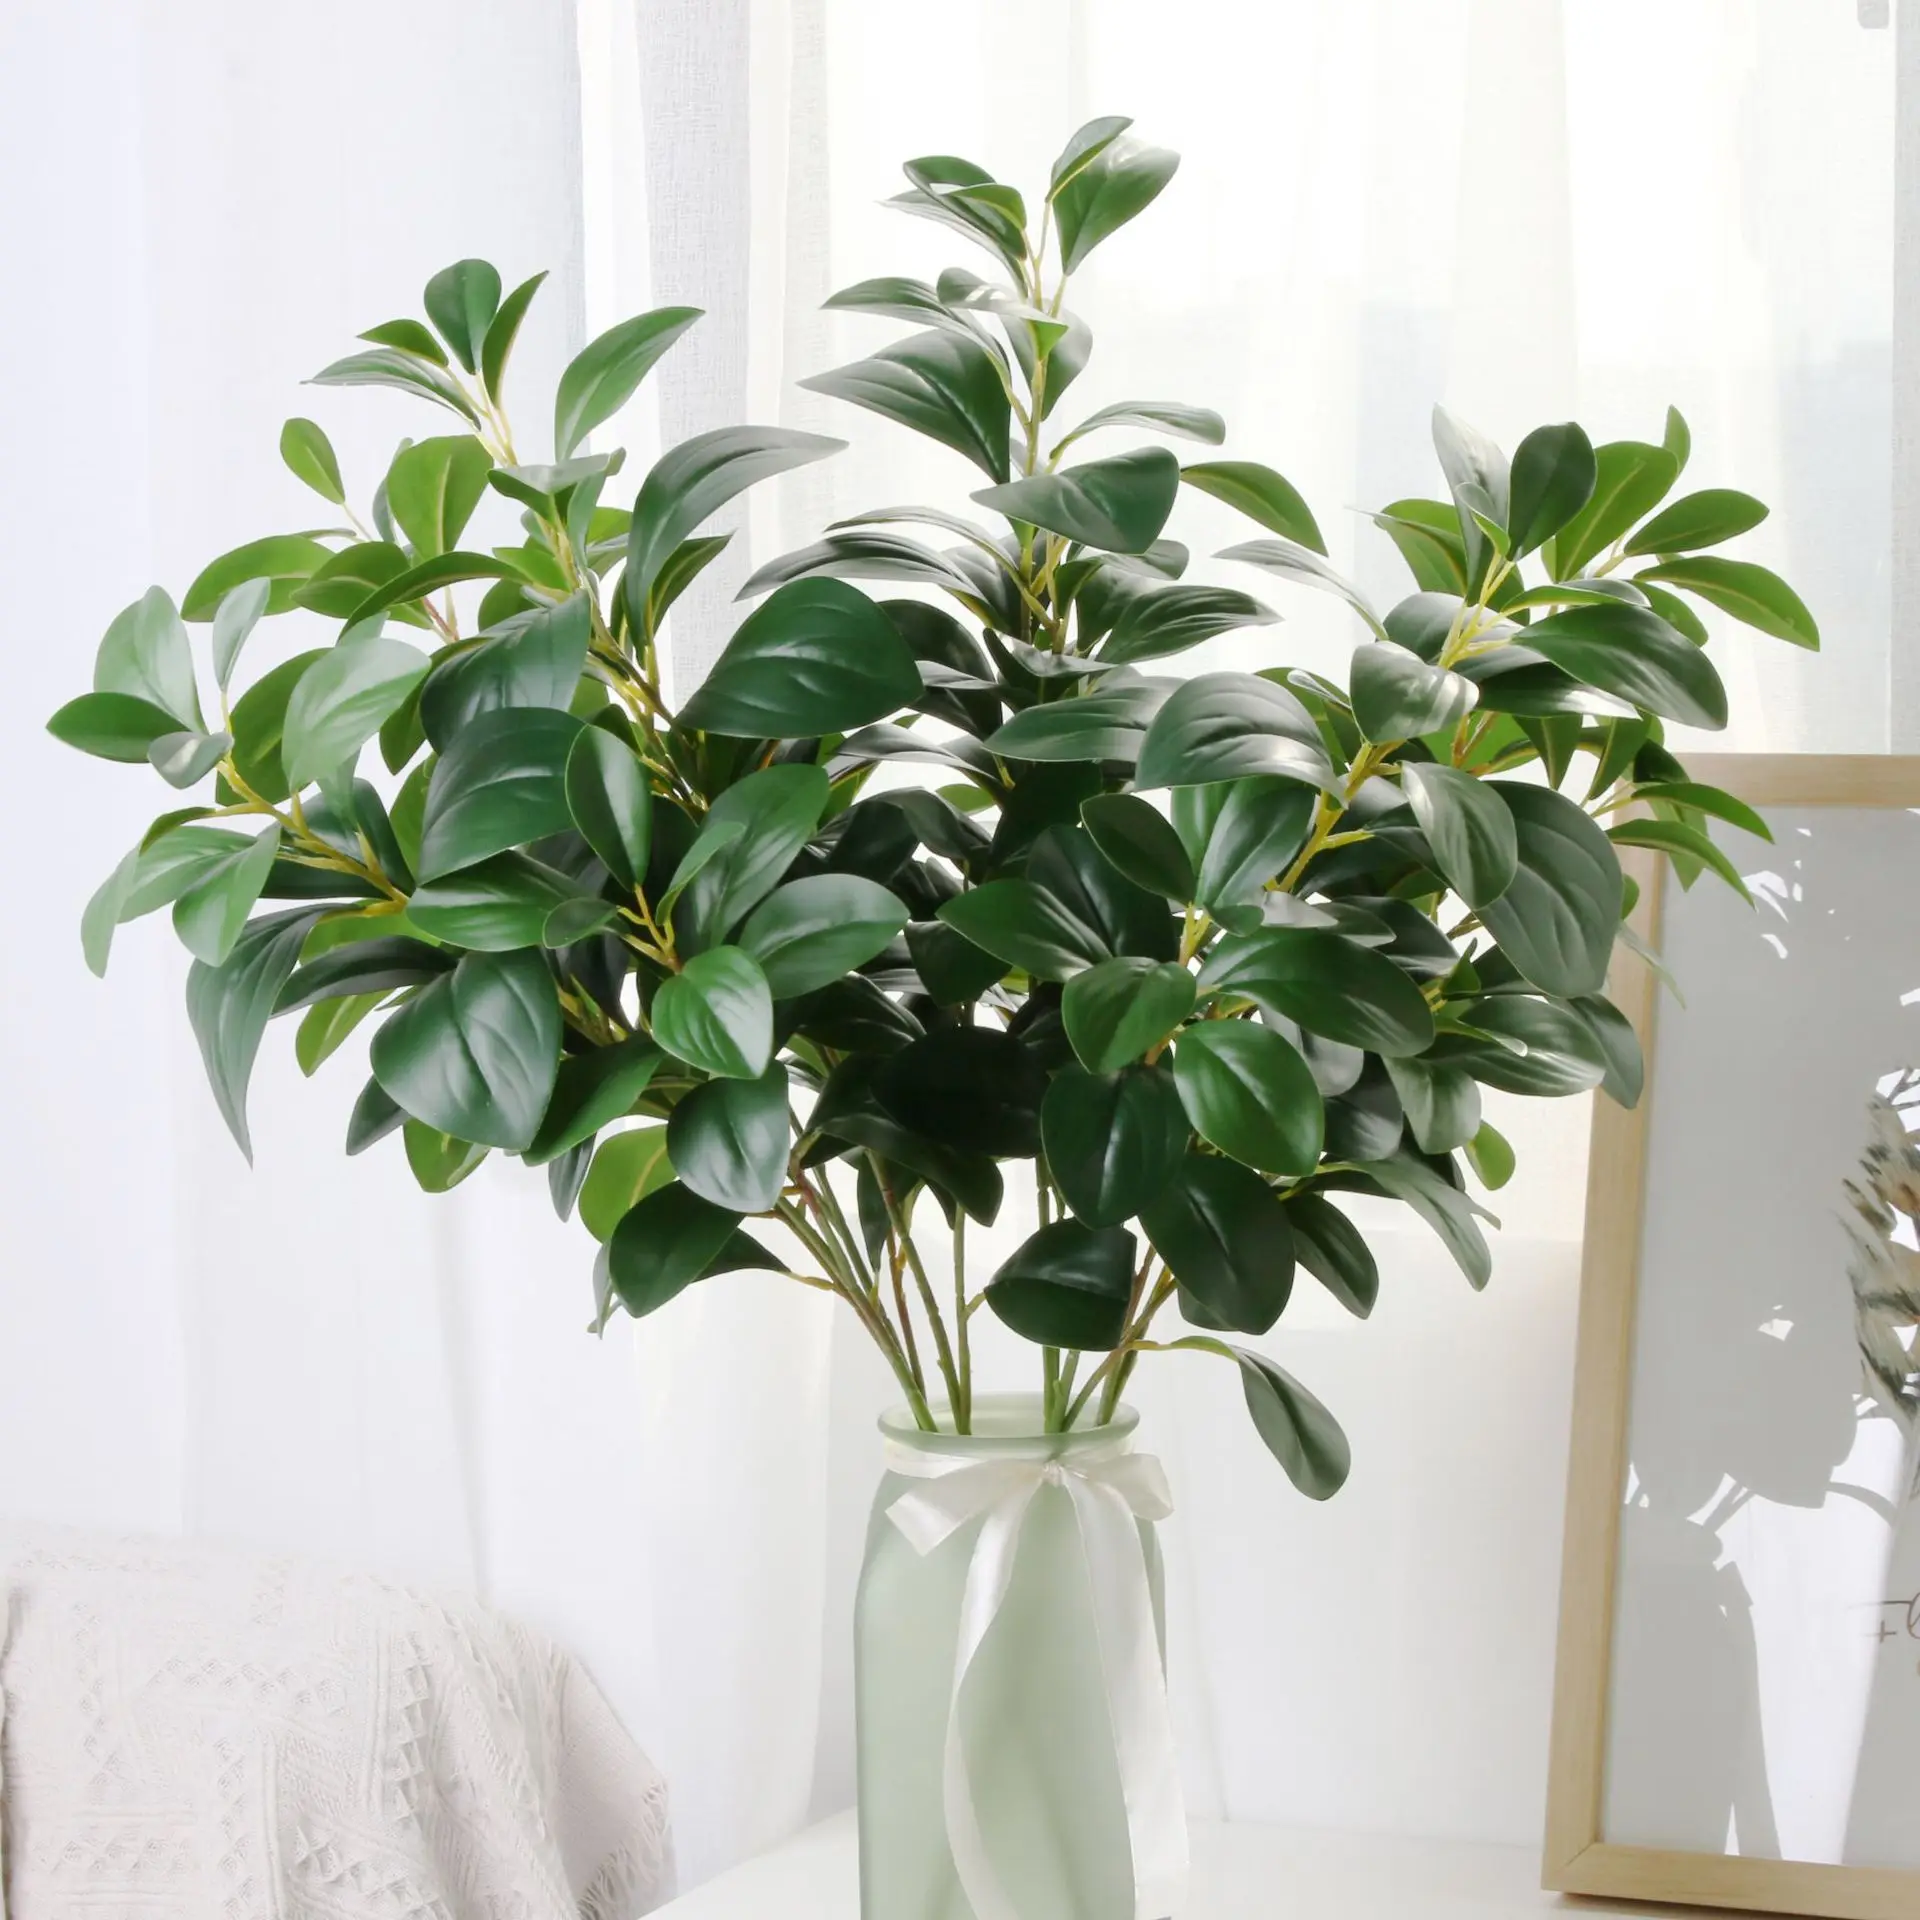 

Wholesale artificial green plant for home garden decor green leaves long stem table vase DIY plant artificial foliage all season, Green or customized